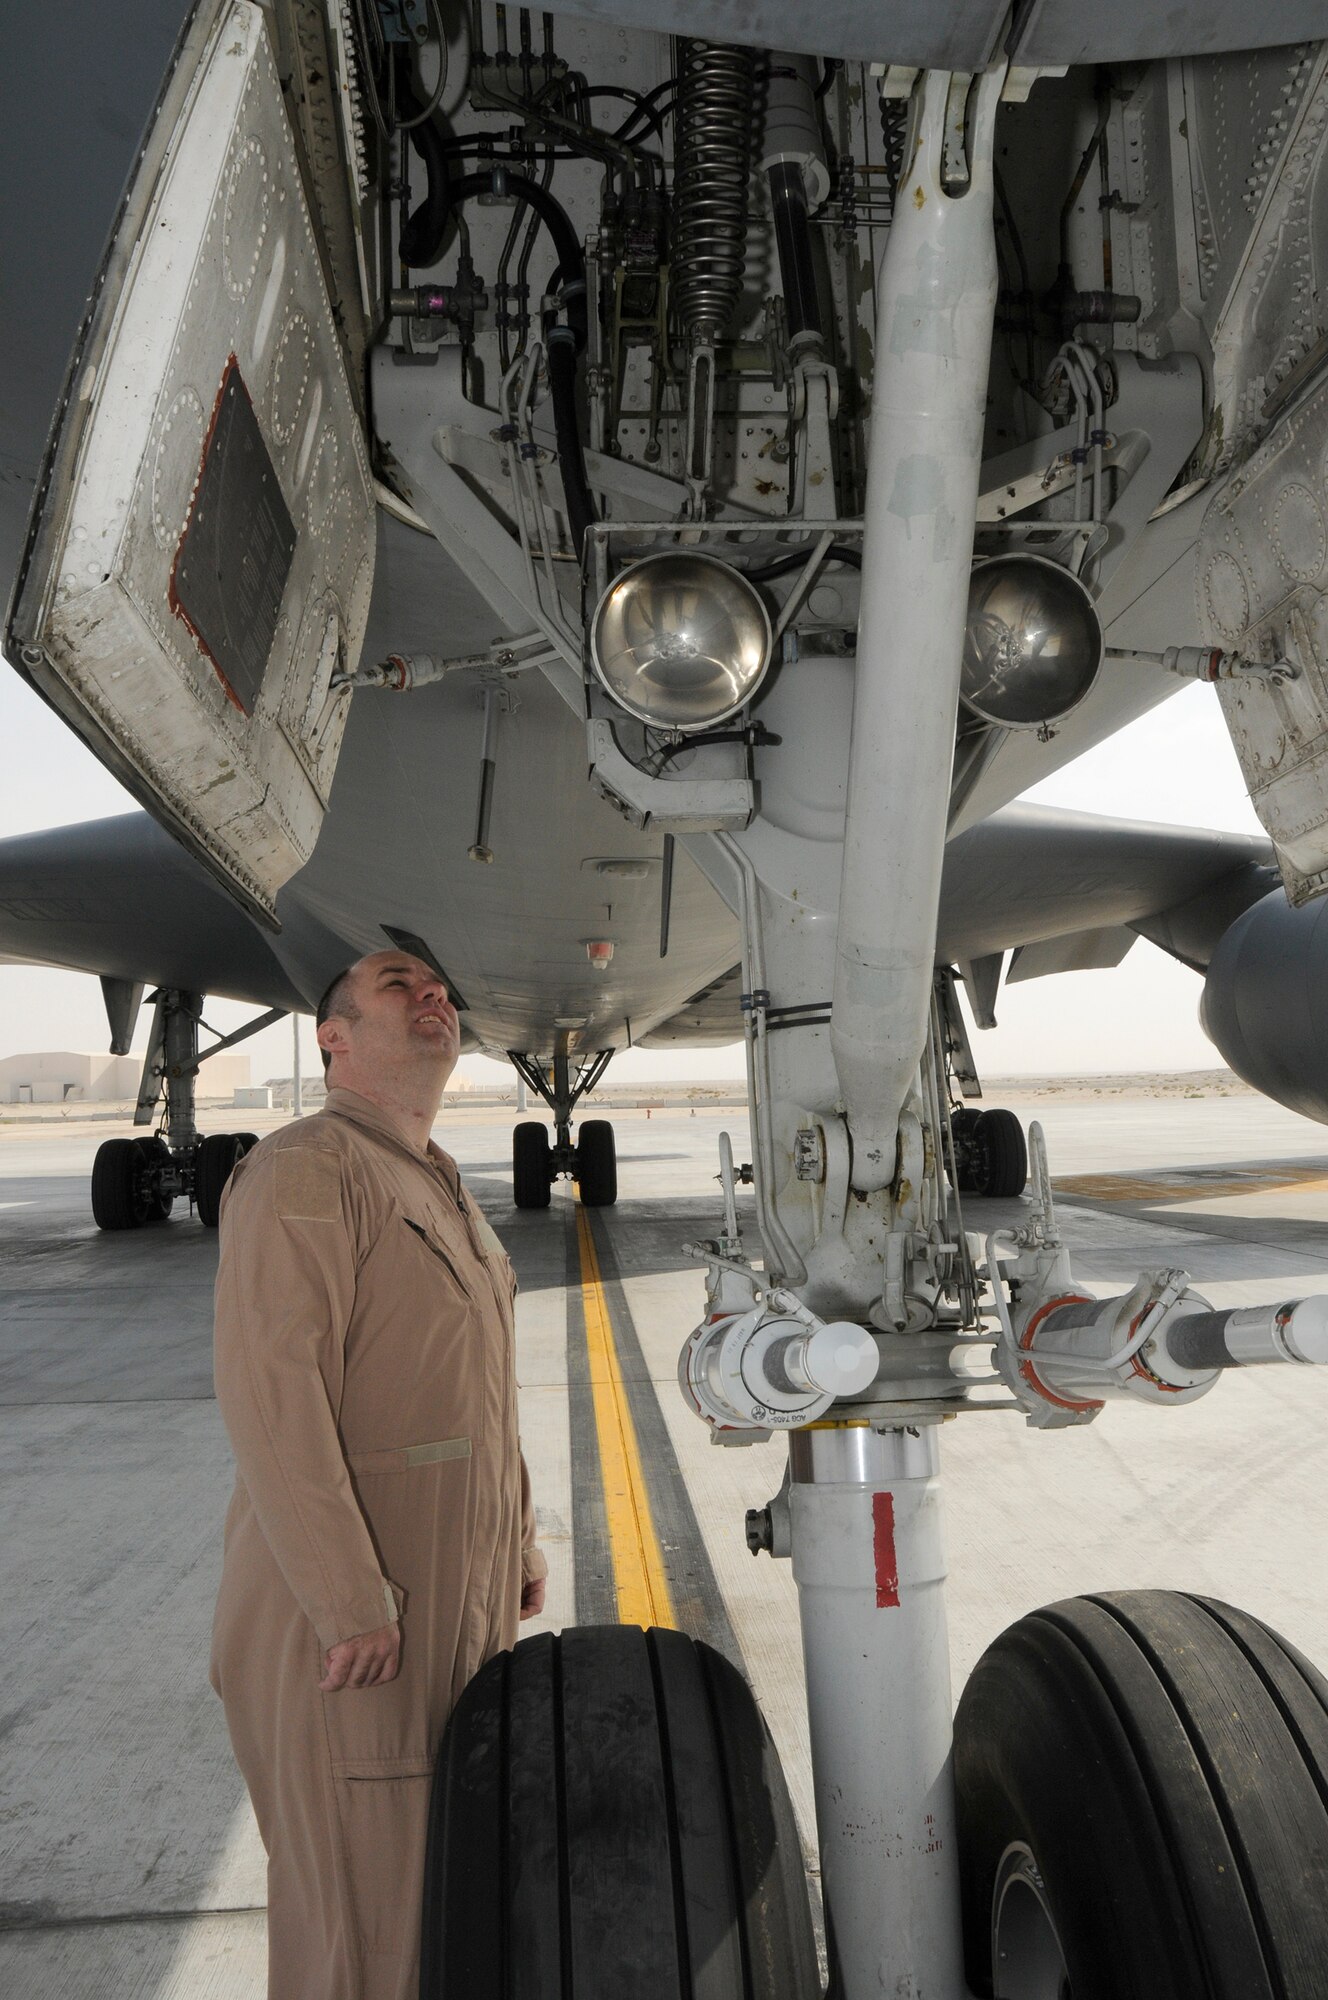 SOUTHWEST ASIA -- Master Sgt. Clifford Hughes from the 908th Expeditionary Air Refueling Squadron performs a preflight scan here Jan. 3. This is an outside the aircraft scan to ensure there is nothing abnormal with the aircraft. He is looking for leaks and missing or loose components. Sergeant Hughes has flown over 300 combat missions, in 7 years of deploying. He has deployed nearly 800 days. Six of the deployments were with the MH-53M Pavelow and three on the KC-10 A Extender. Sergeant Hughes is deployed from the 2nd ARS McGuire Air Force Base, N.J., his hometown is Goshen, Ohio. (U.S. Air Force photo/Tech. Sgt. Christopher A. Campbell) (released)